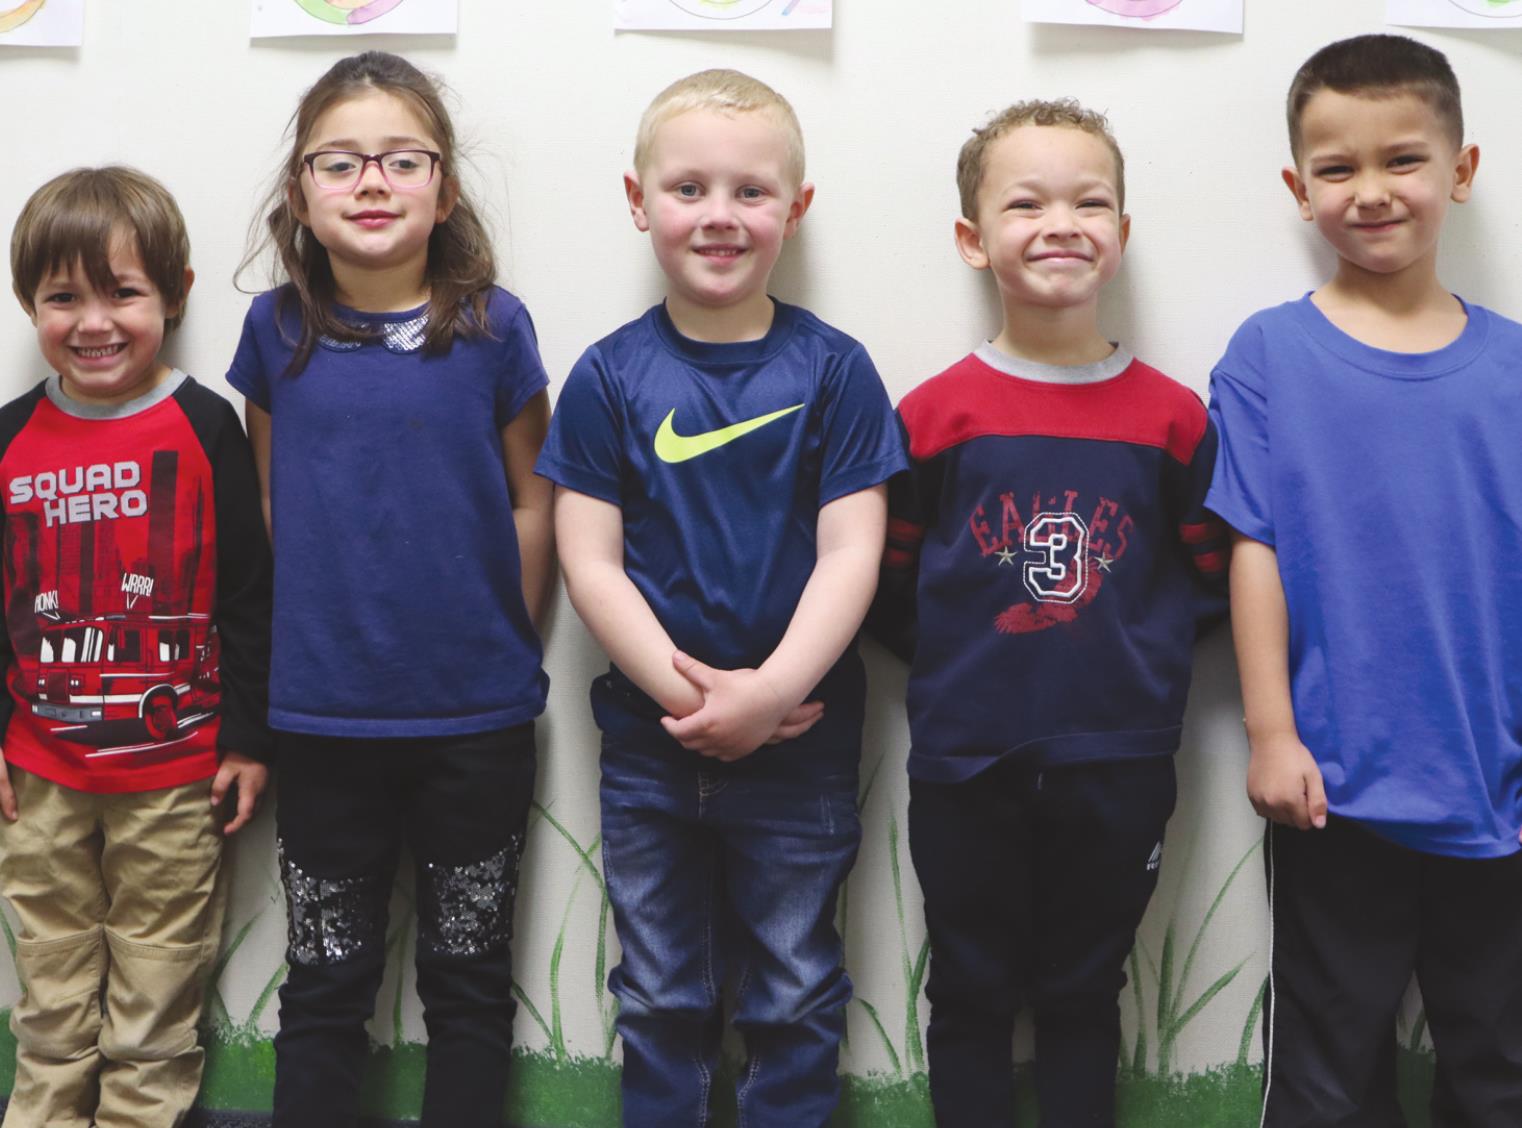 Pictured members of Sharon Mahan’s PM Pre-K class who wore red and blue Thursday. From left is Jackson Pouns, Ellena de la Cruz, Jason Clark, Kellon Lodes and Everett Lewis. vLeanna Cook/WDN